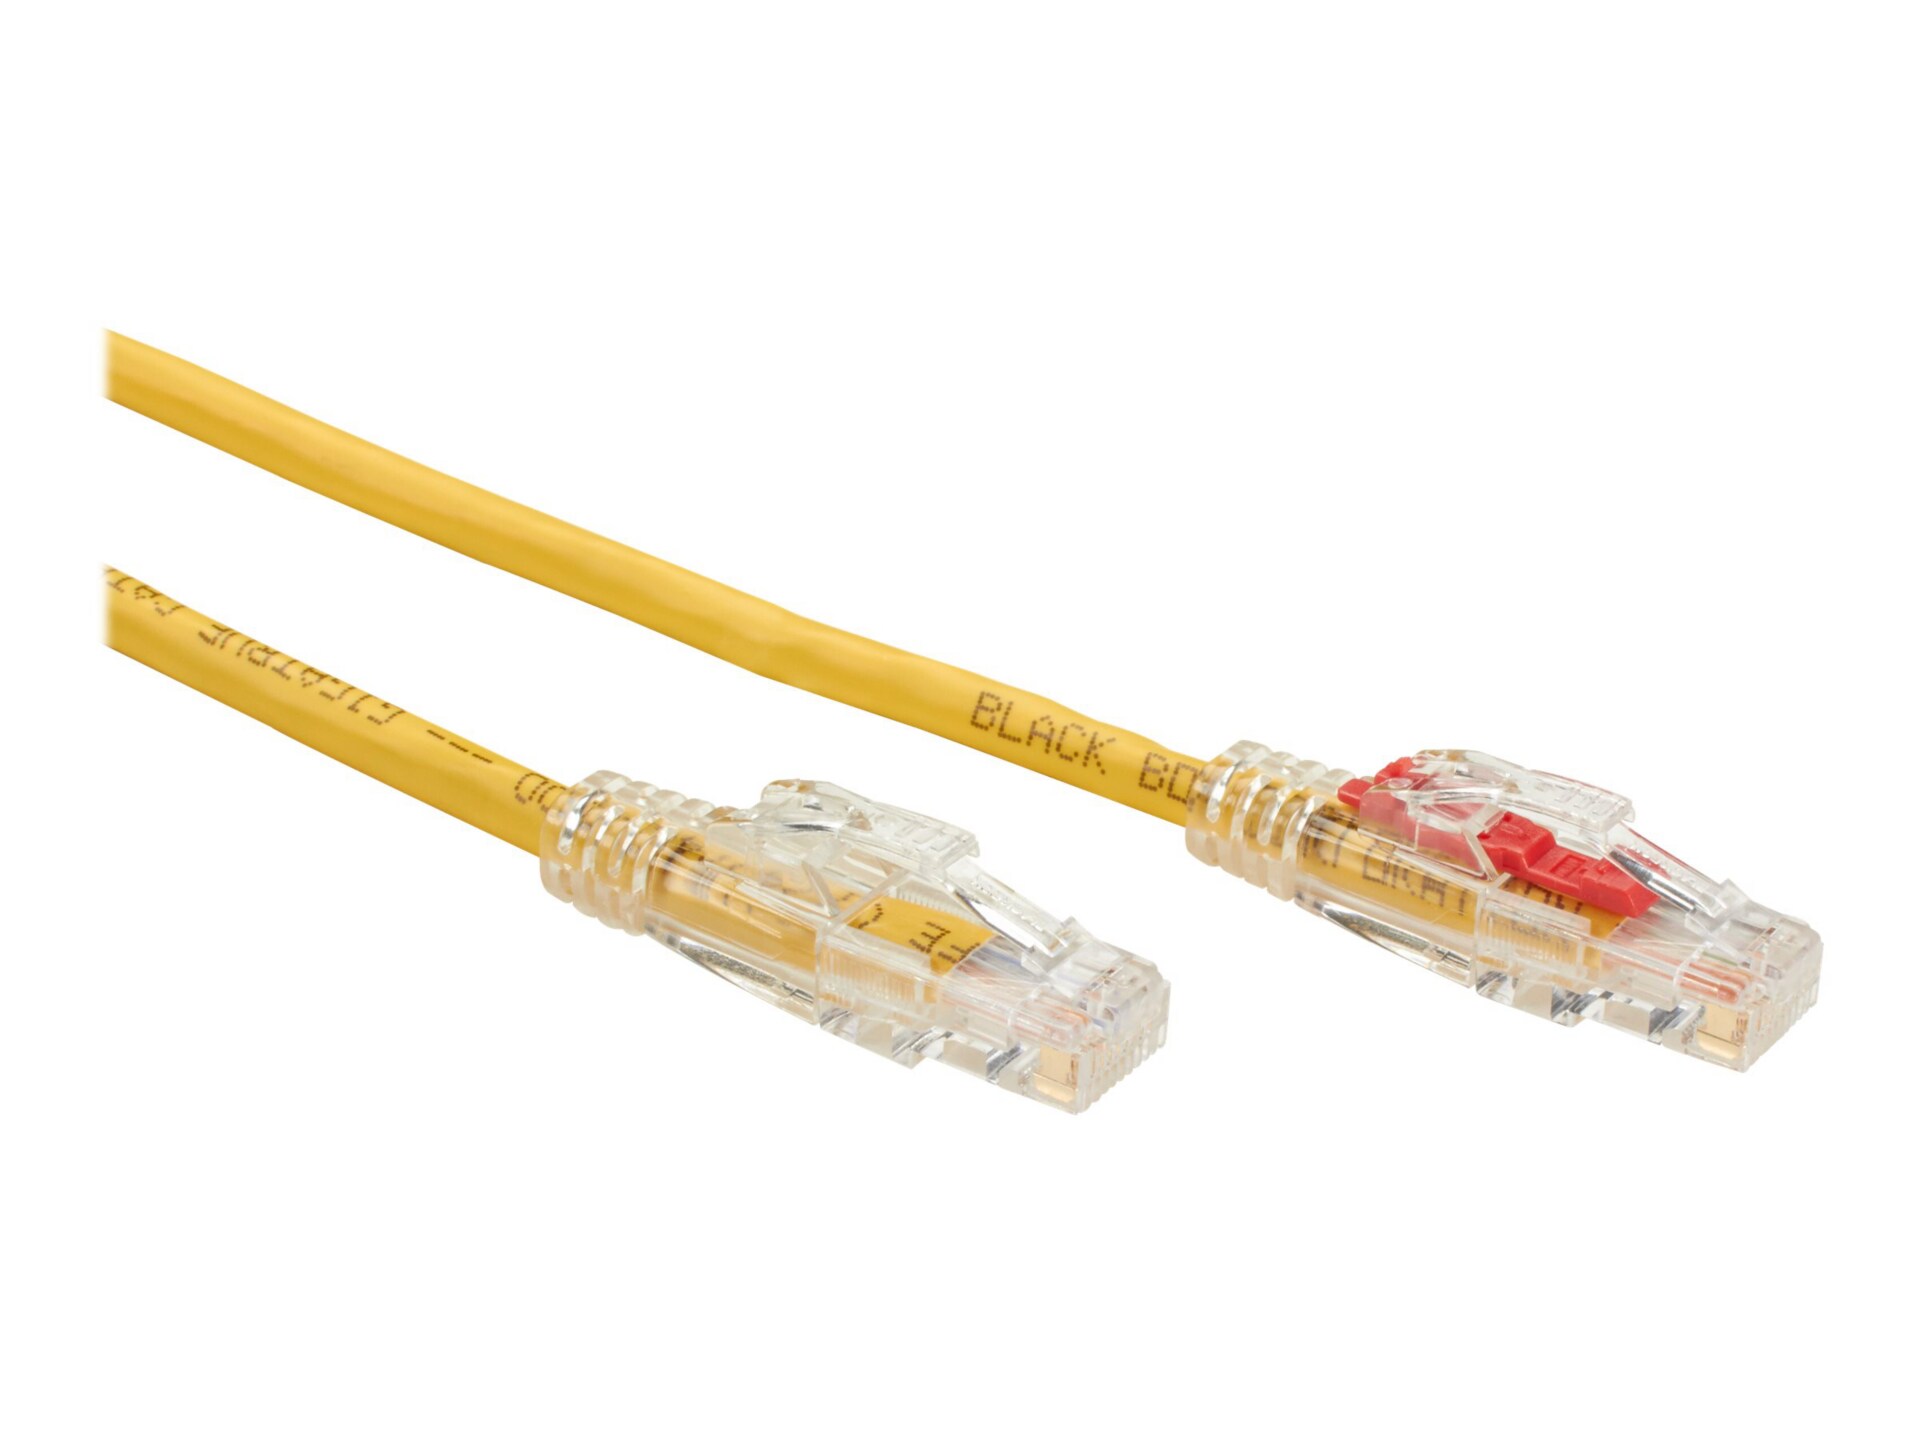 Black Box GigaBase 3 patch cable - 7 ft - yellow